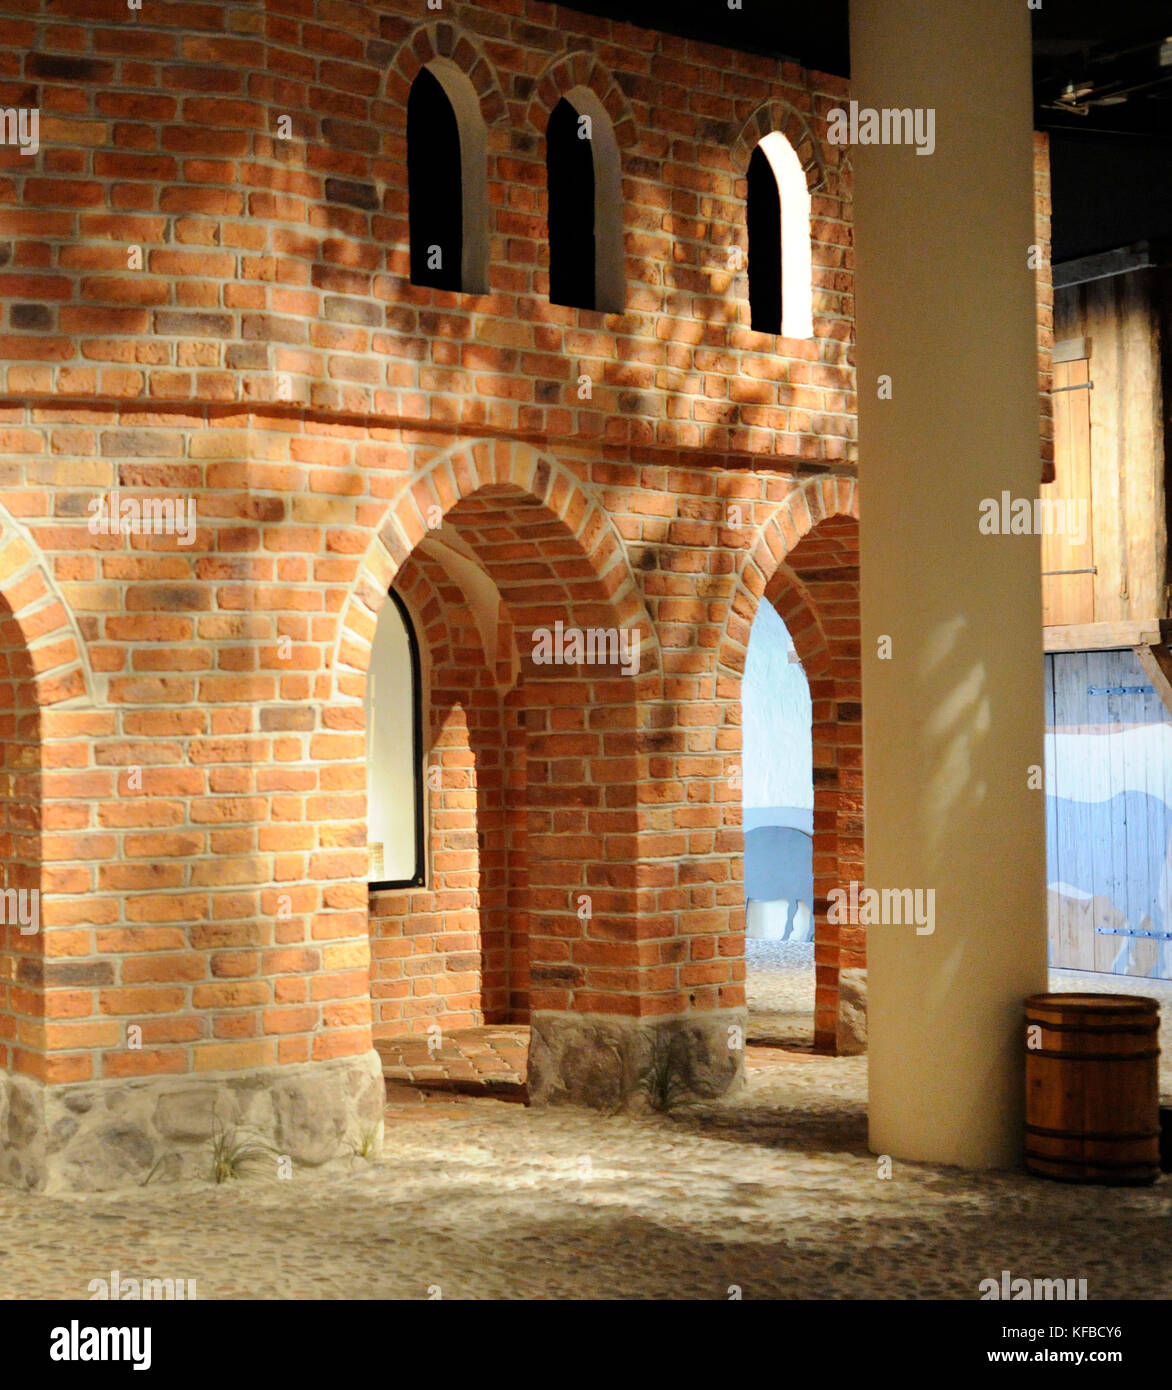 History of Sweden. Middle Ages. Reproduction of a medieval scandinavian monastery in brick. Historical Museum. Stockholm. Sweden. Stock Photo